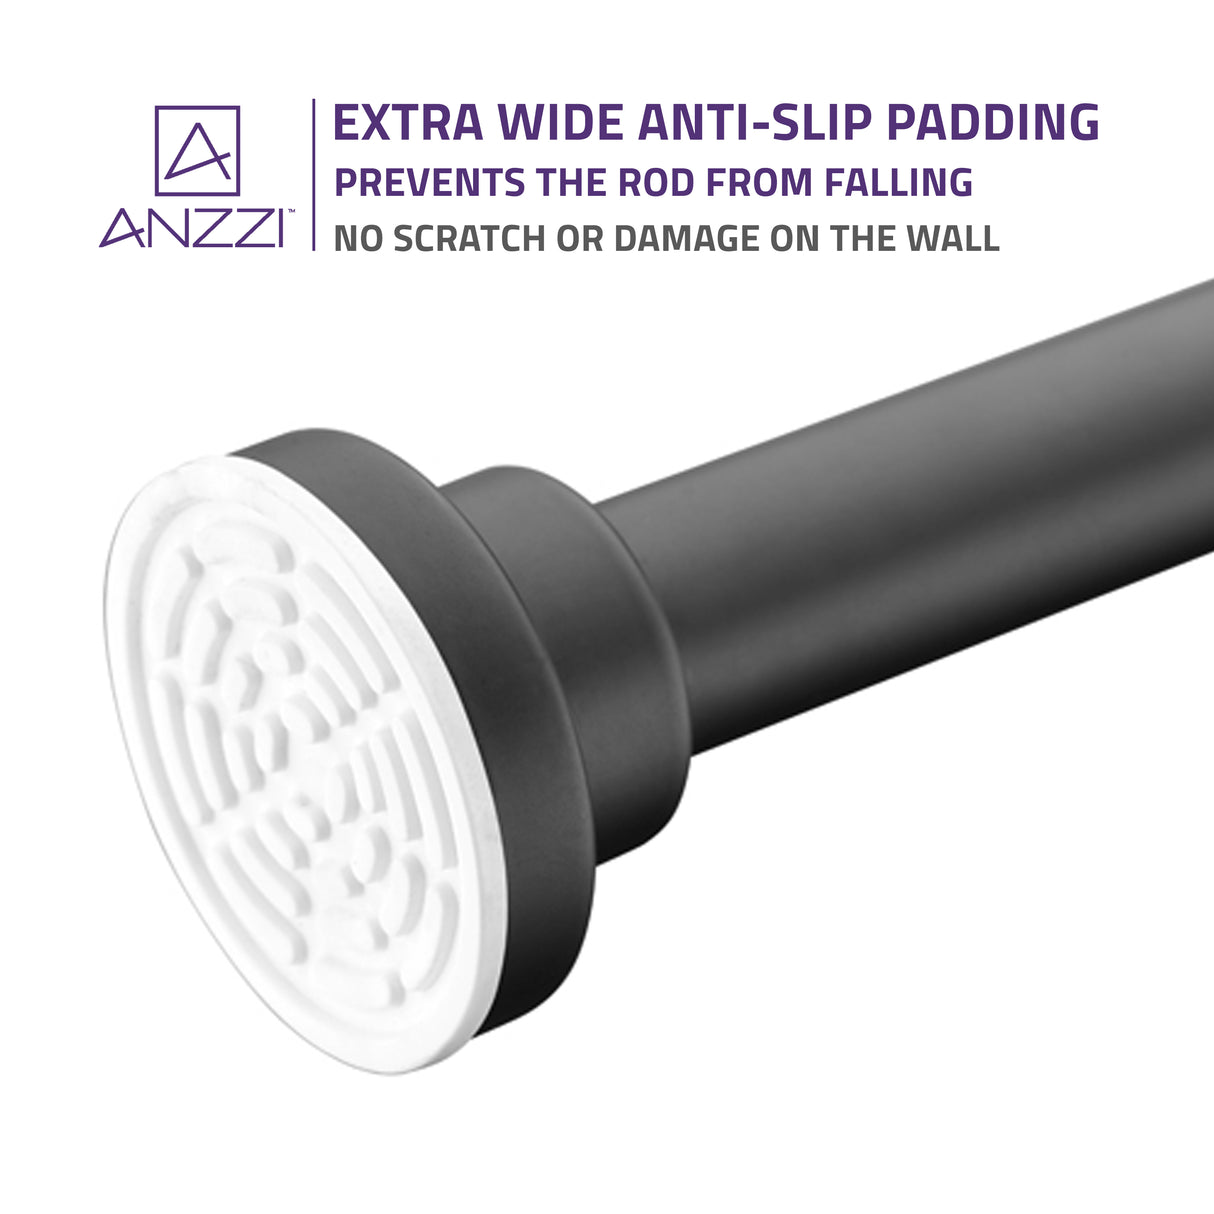 ANZZI AC-AZSR88MB 48-88 Inches Shower Curtain Rod with Shower Hooks in Matt Black | Adjustable Tension Shower Doorway Curtain Rod | Rust Resistant No Drilling Anti-Slip Bar for Bathroom | AC-AZSR88MB